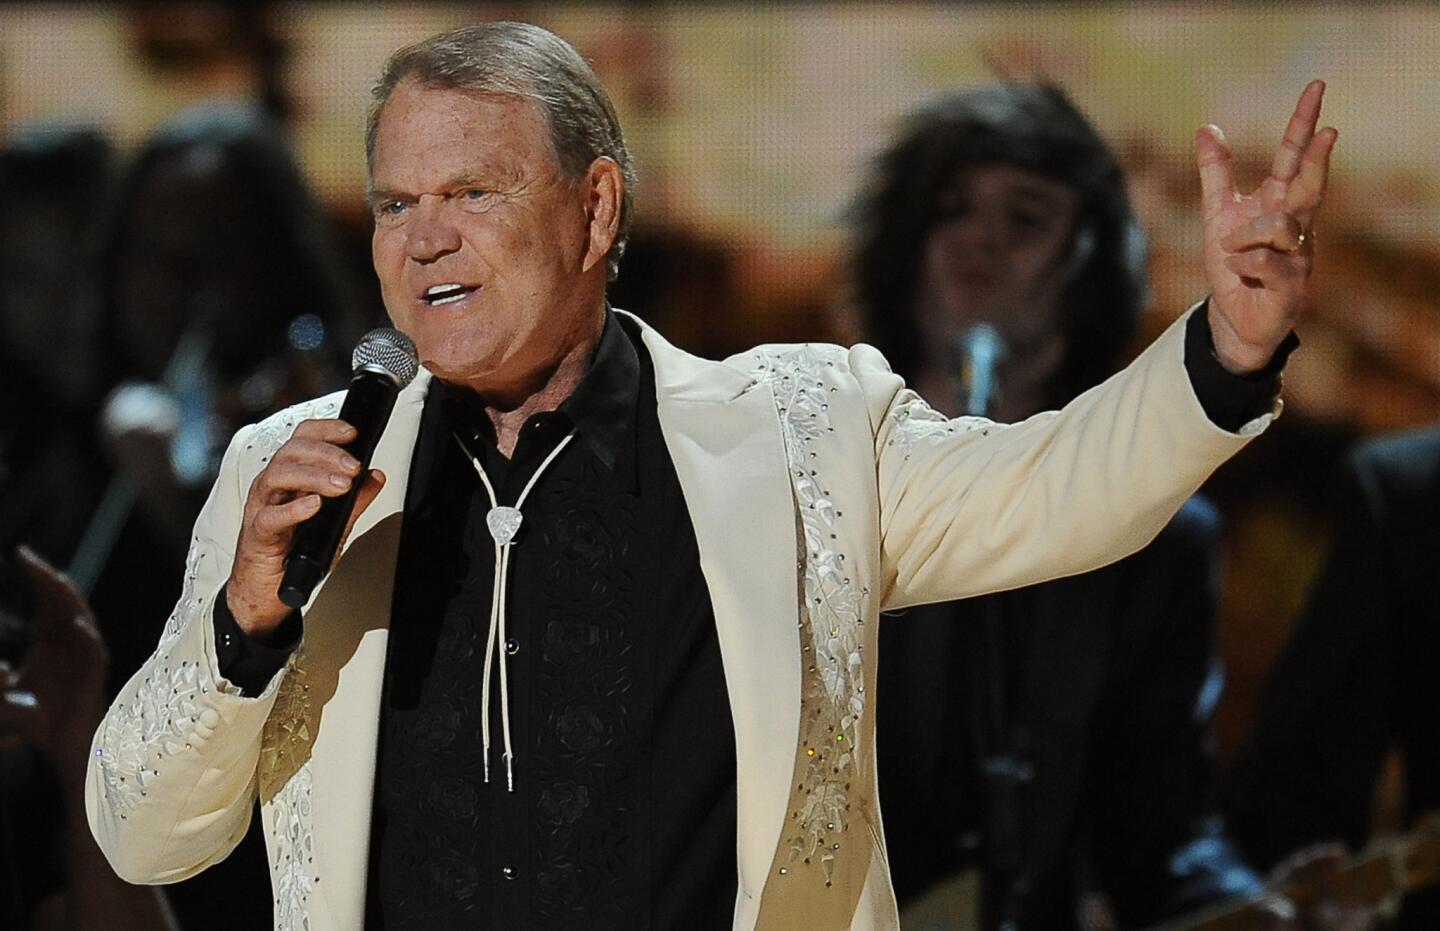 Country music legend Glen Campbell, known for "Rhinestone Cowboy" and more among his 75 chart hits, died on Aug. 8, 2017, after a long and public battle with Alzheimer's Disease. He was 81. Read more.